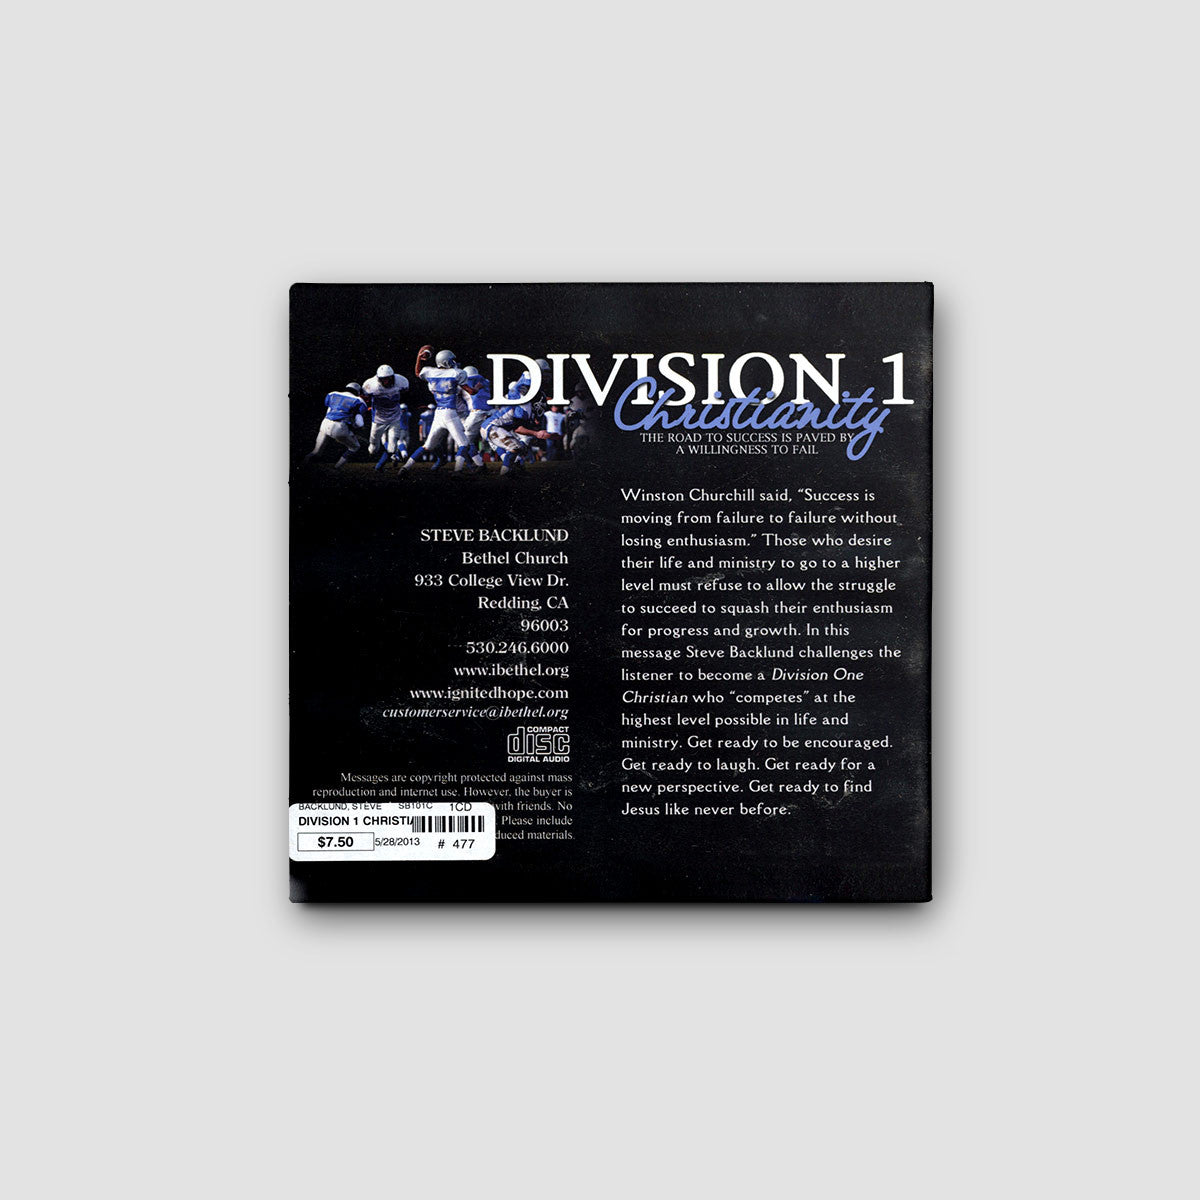 Division 1 Christianity